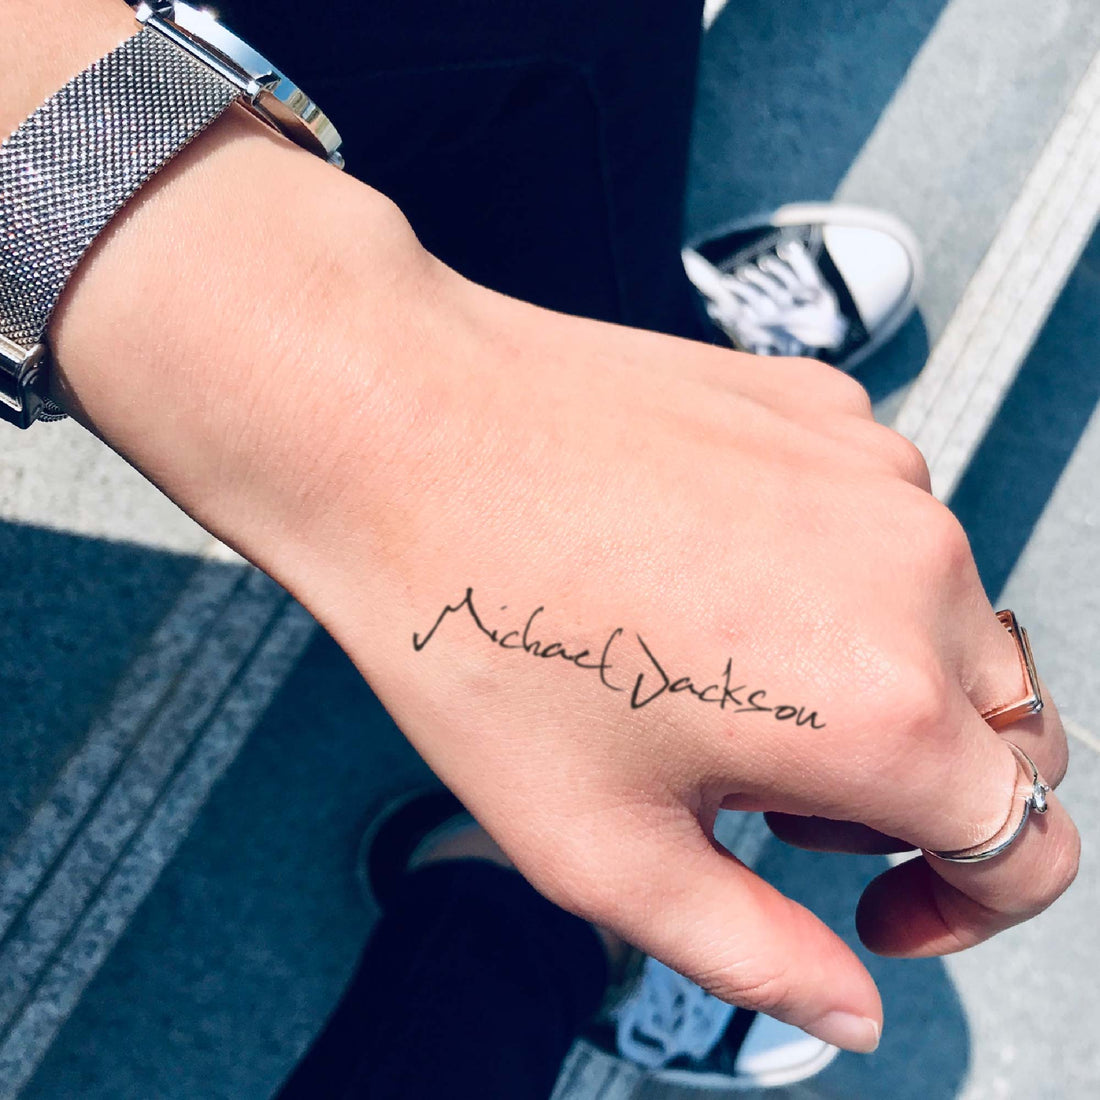 Michael Jackson custom temporary tattoo sticker design idea inspiration meanings removal arm wrist hand words font name signature calligraphy lyrics tour concert outfits merch accessory gift souvenir costumes wear dress up code